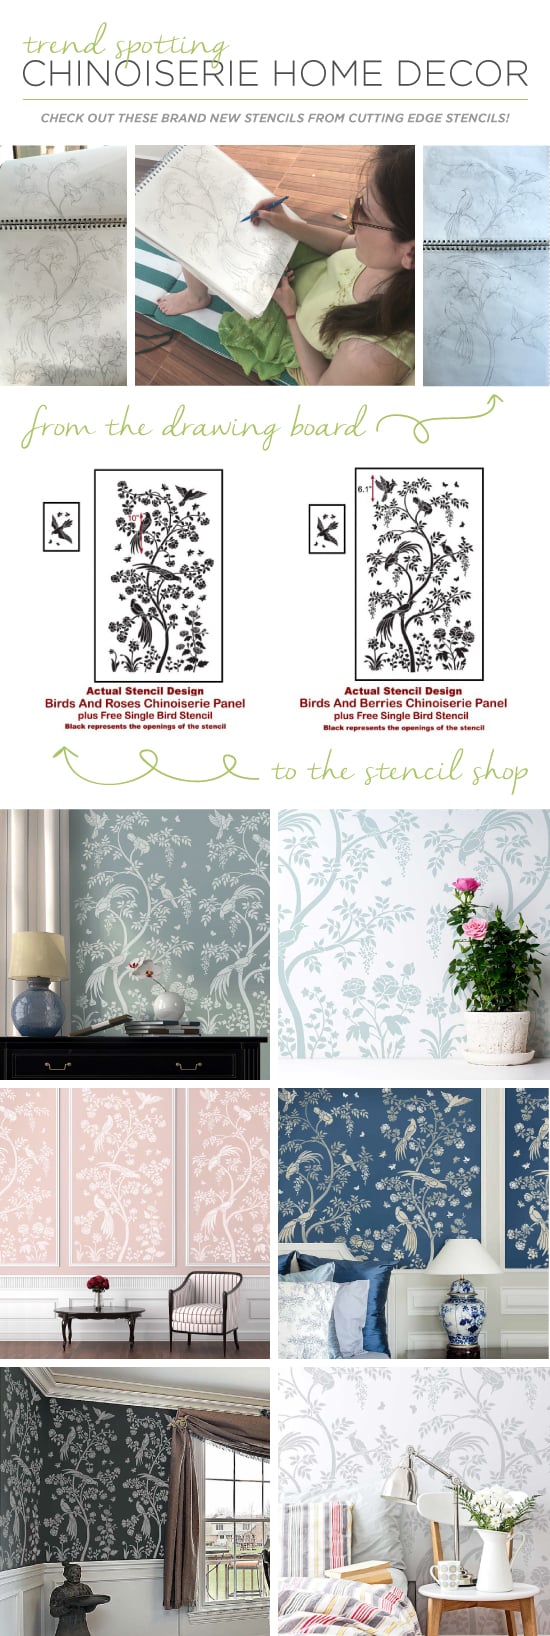 DIY Chinoiserie Wall Mural Panels from Cutting Edge Stencils achieve a wallpaper look. http://bit.ly/ChinoiserieStencils